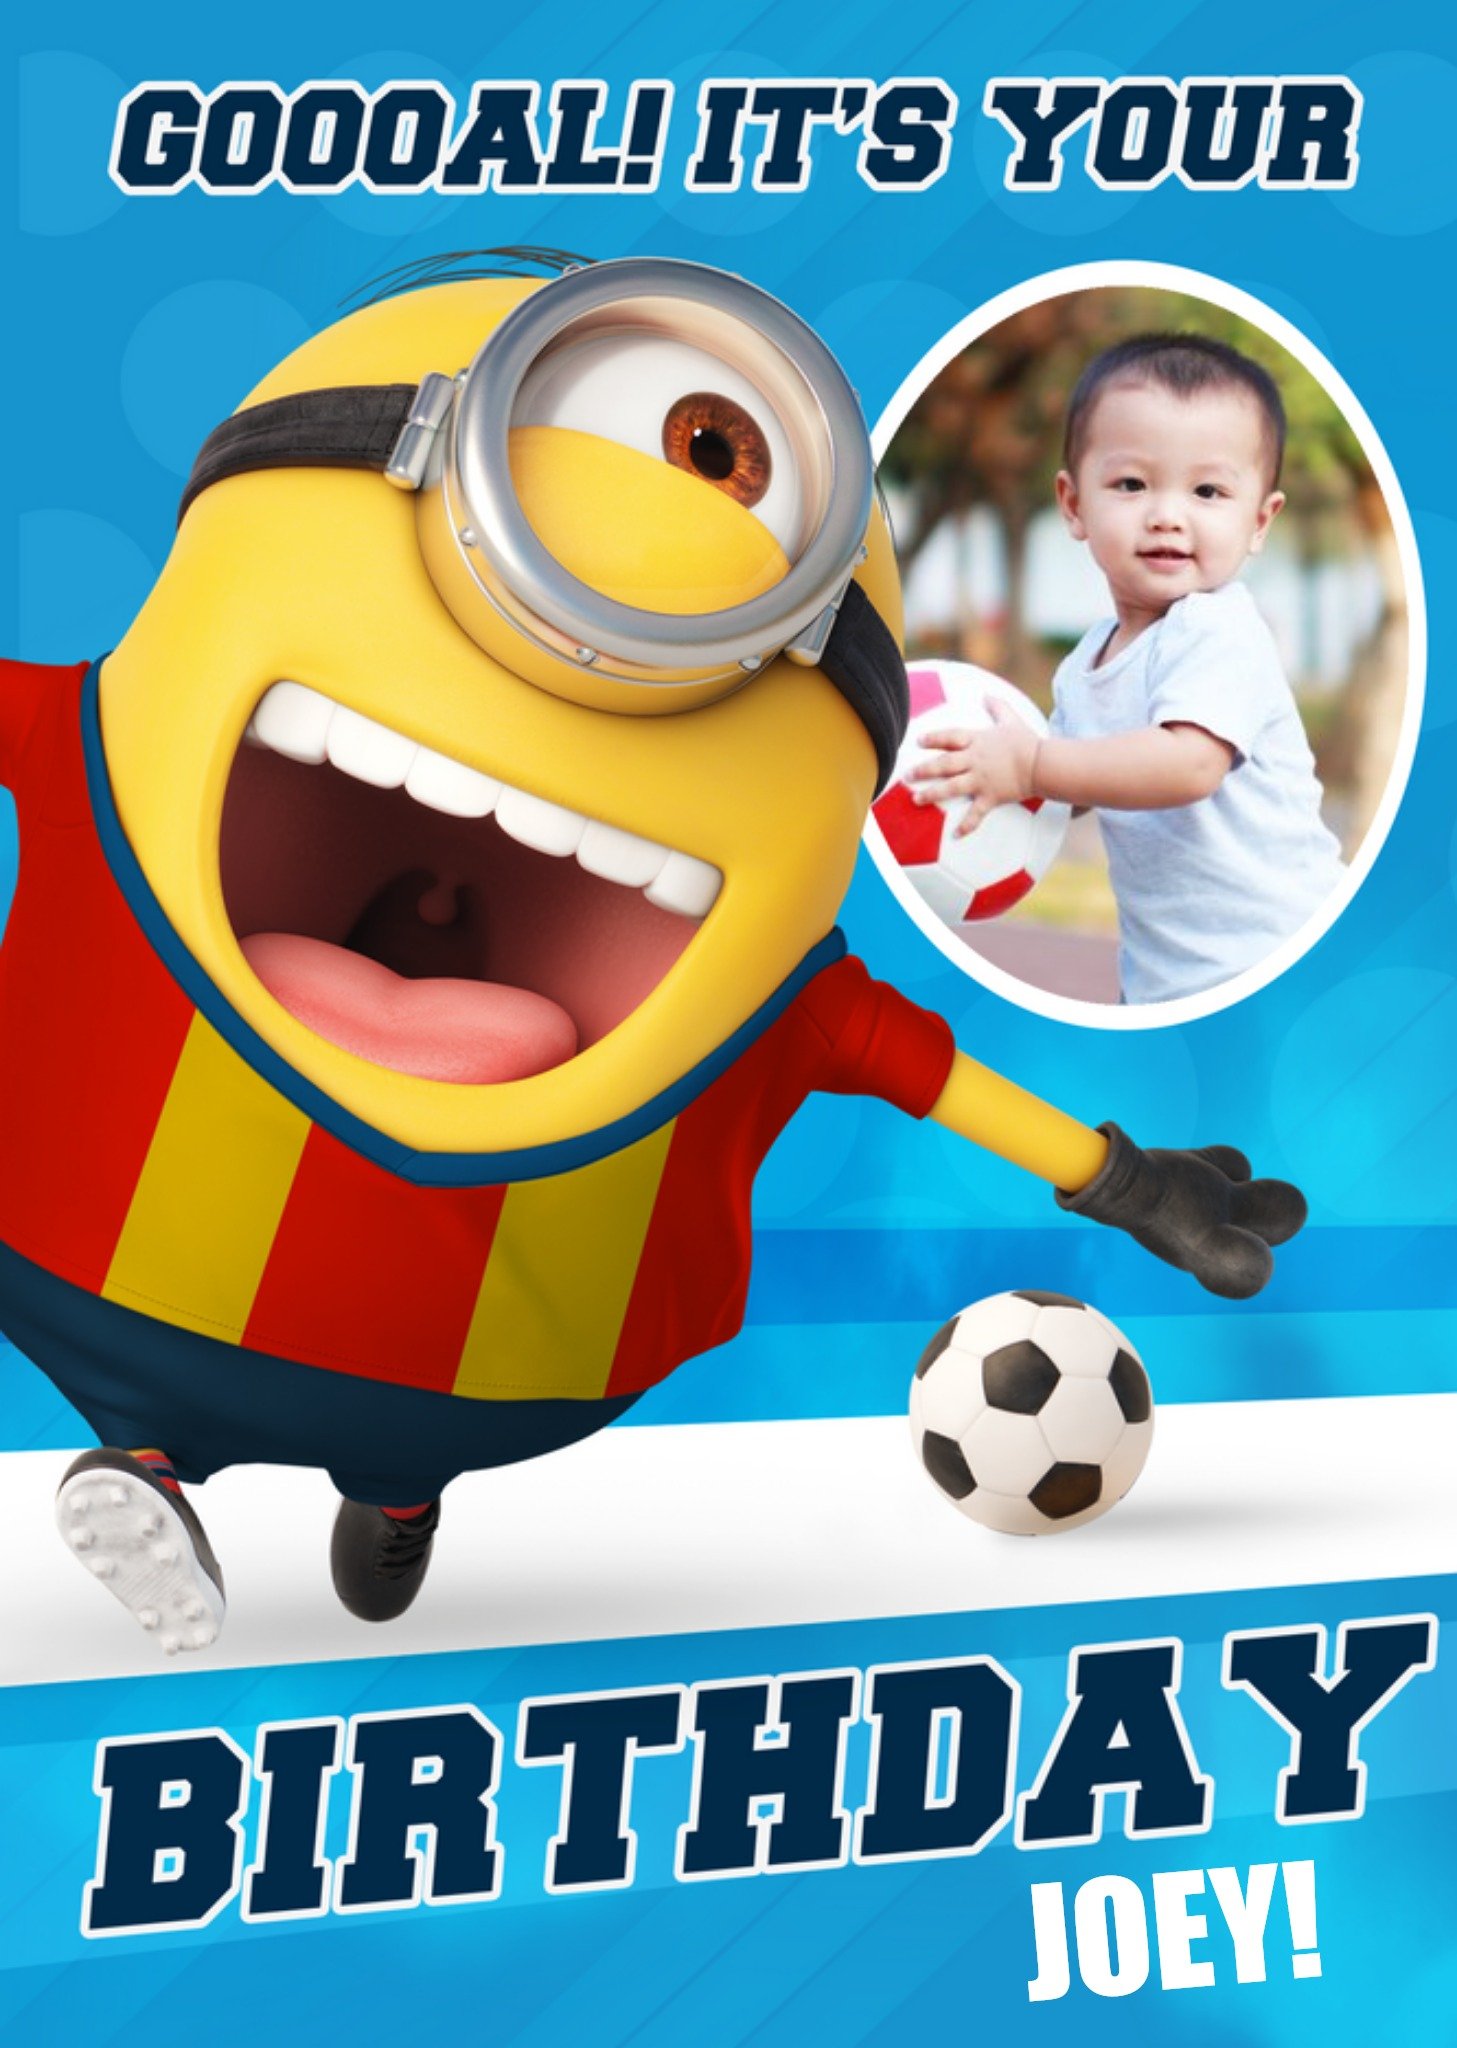 Despicable Me Kid's Birthday Cards - Minions - Football - Photo Upload Cards, Large